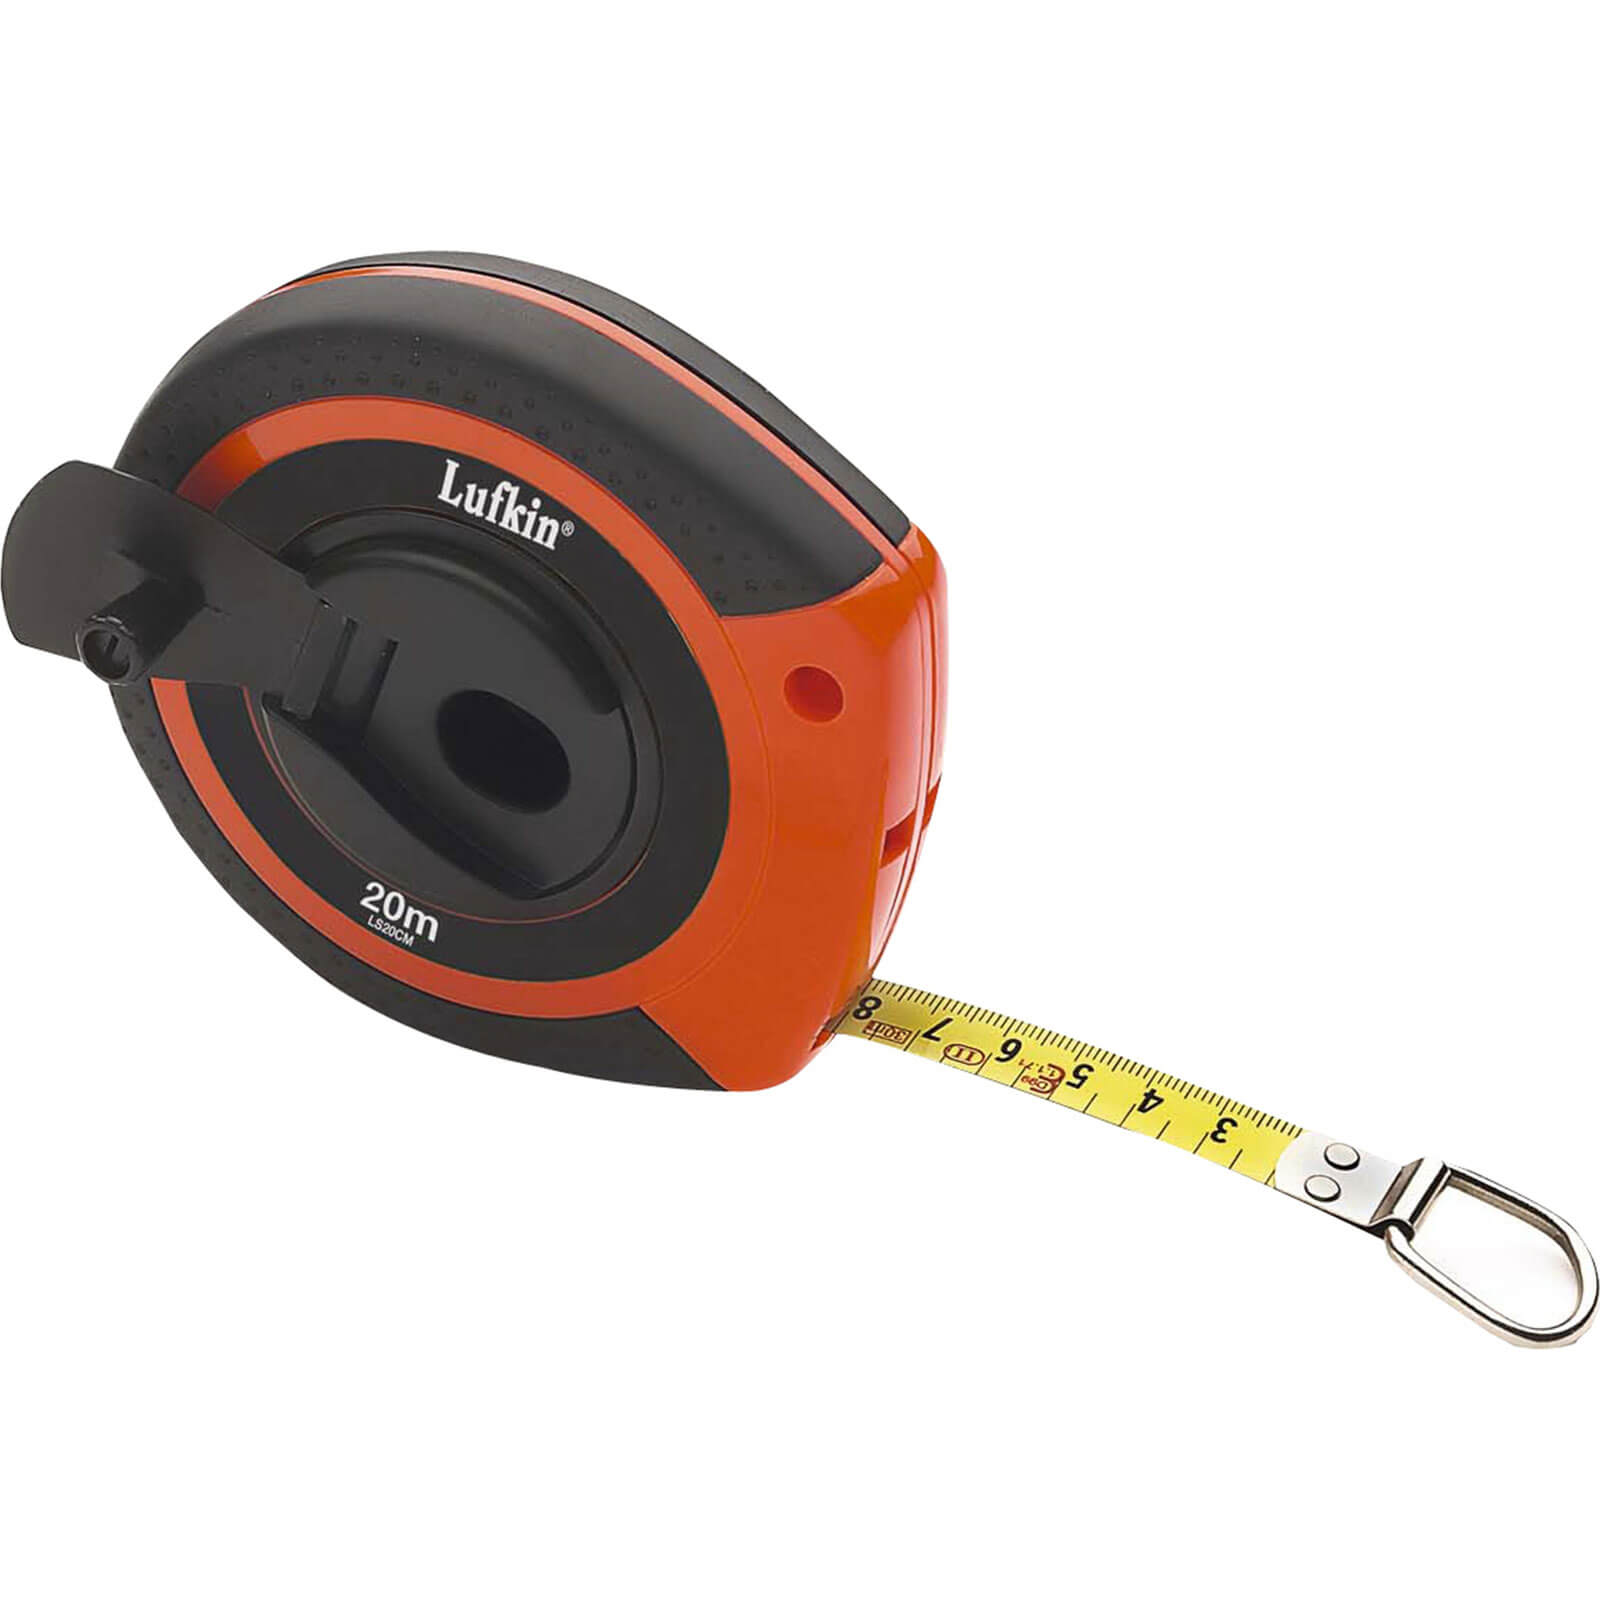 Image of Lufkin Special Long Tape Measure Imperial & Metric 66ft / 20m 10mm